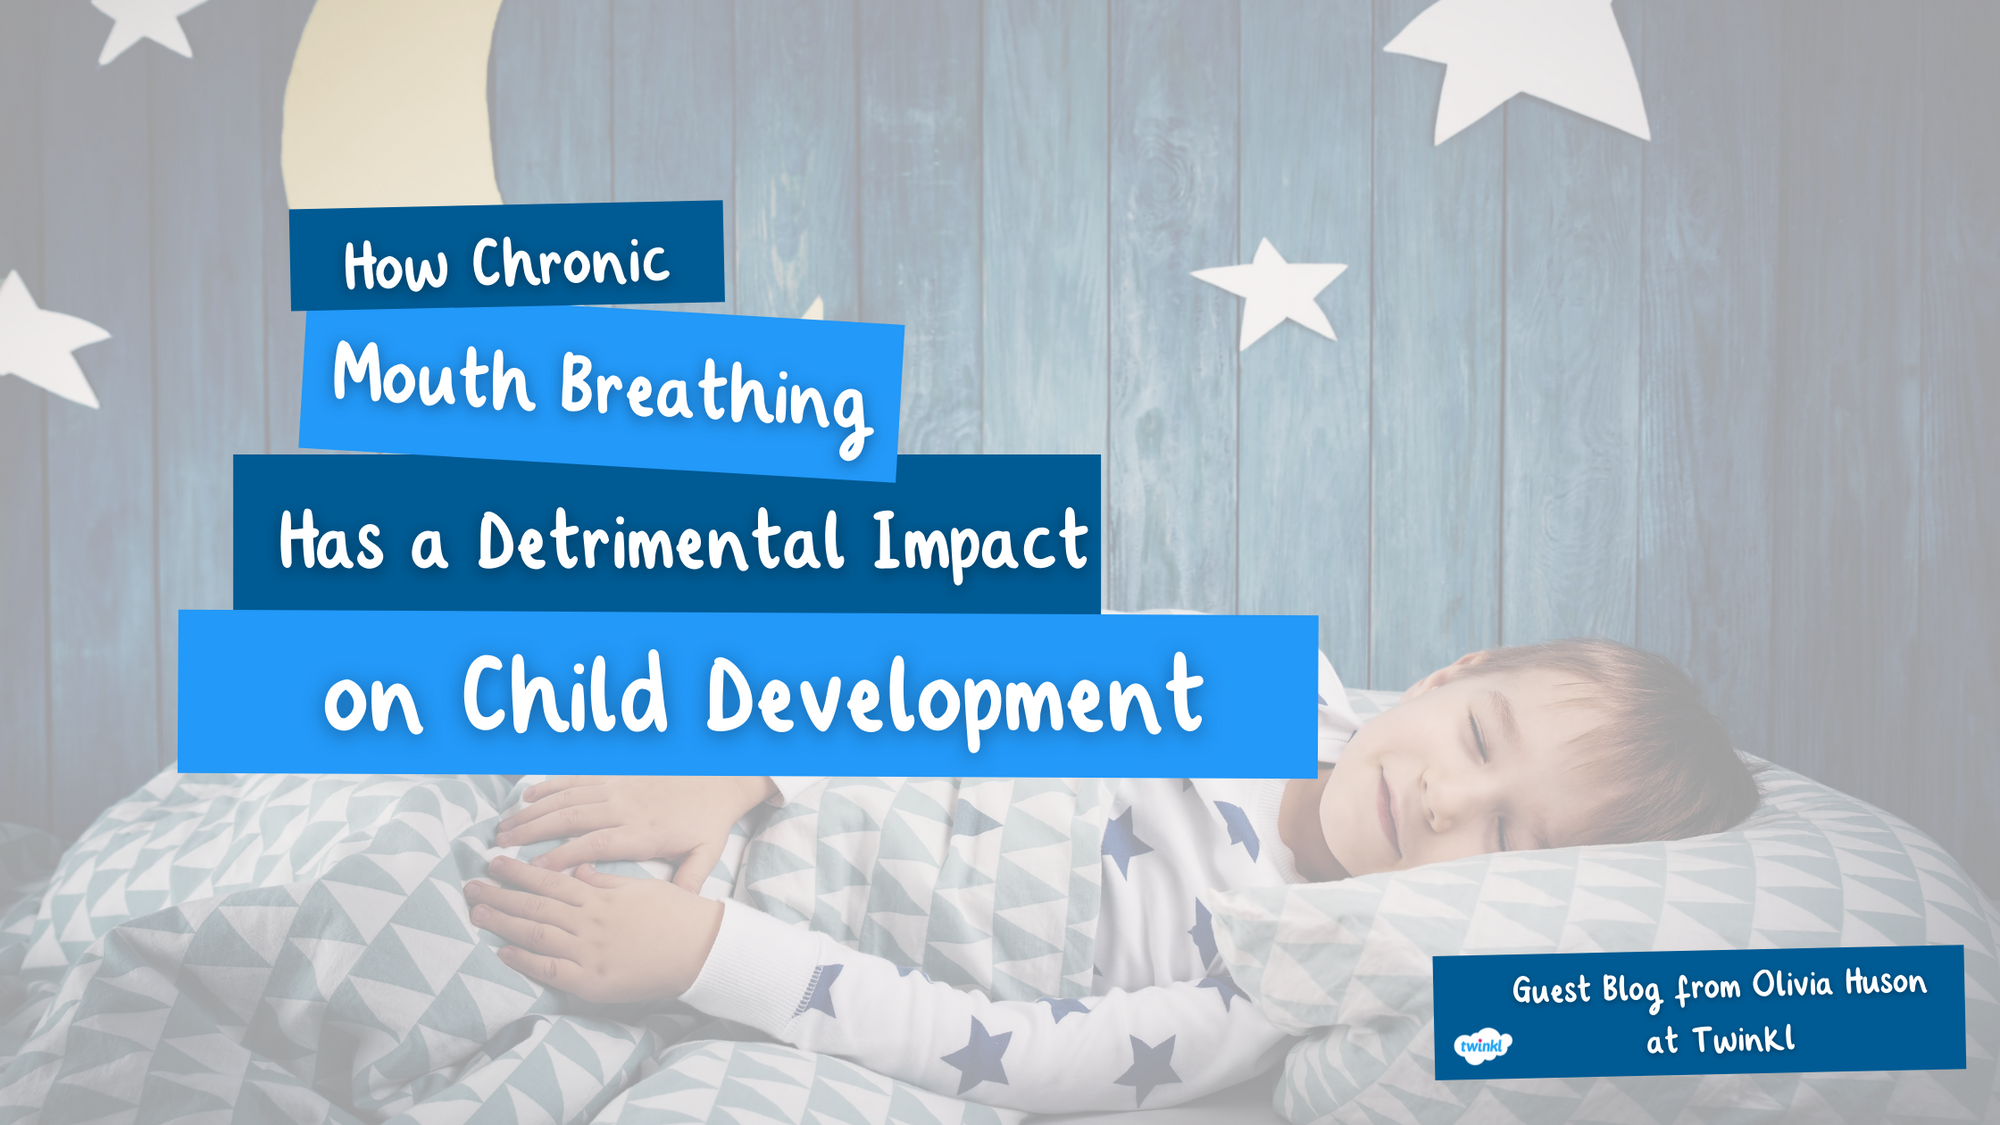 How Chronic Mouth Breathing has a detrimental impact on Child Development.